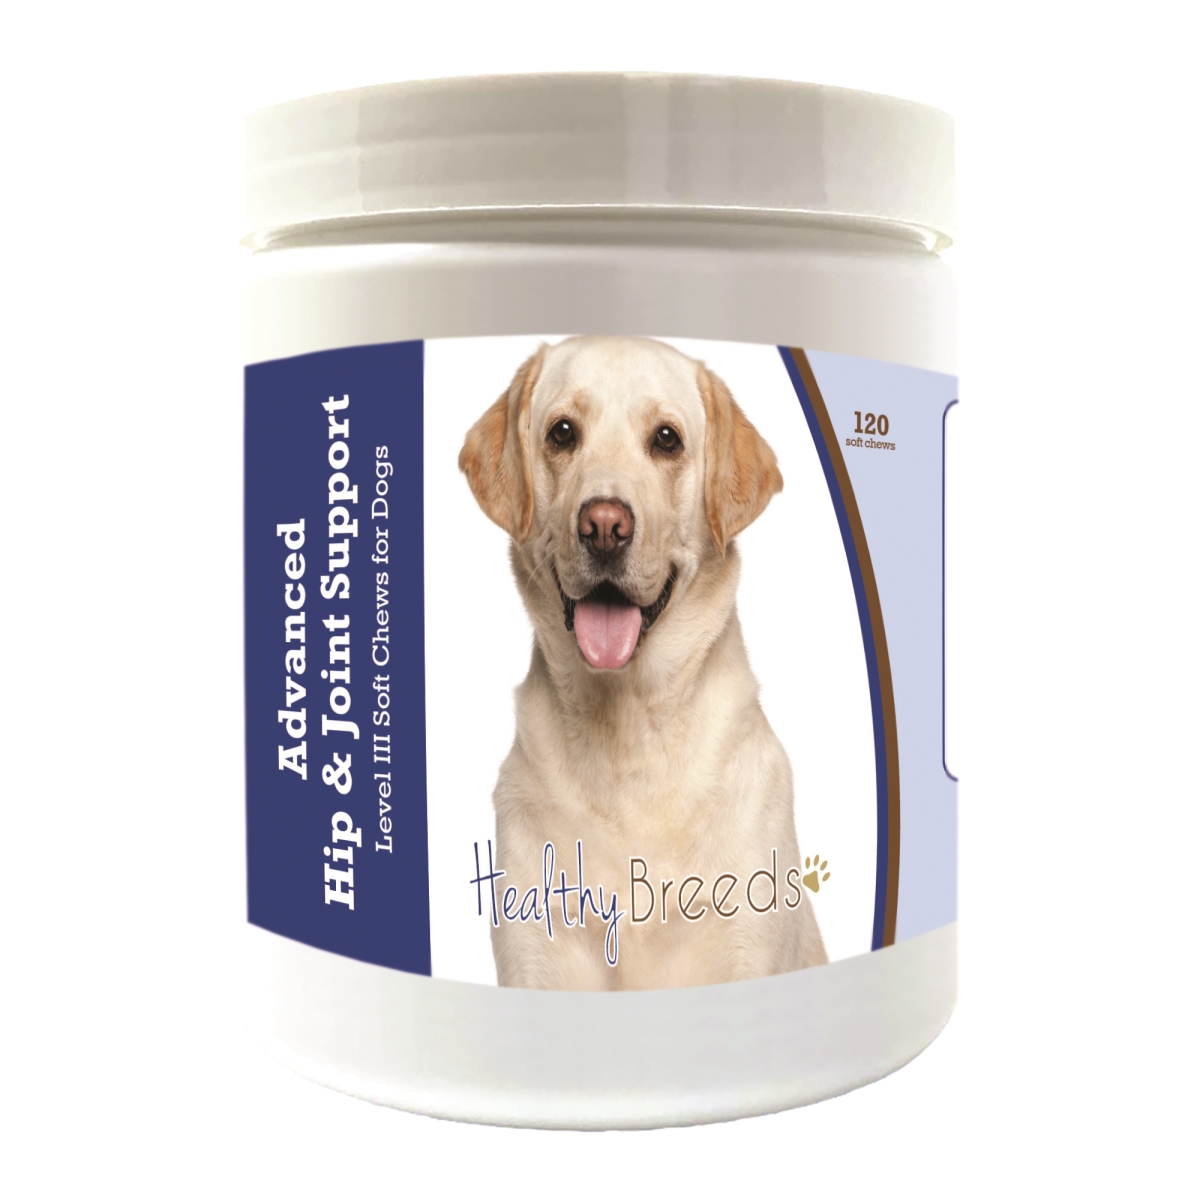 Picture of Healthy Breeds 192959898569 Labrador Retriever Advanced Hip & Joint Support Level III Soft Chews for Dogs